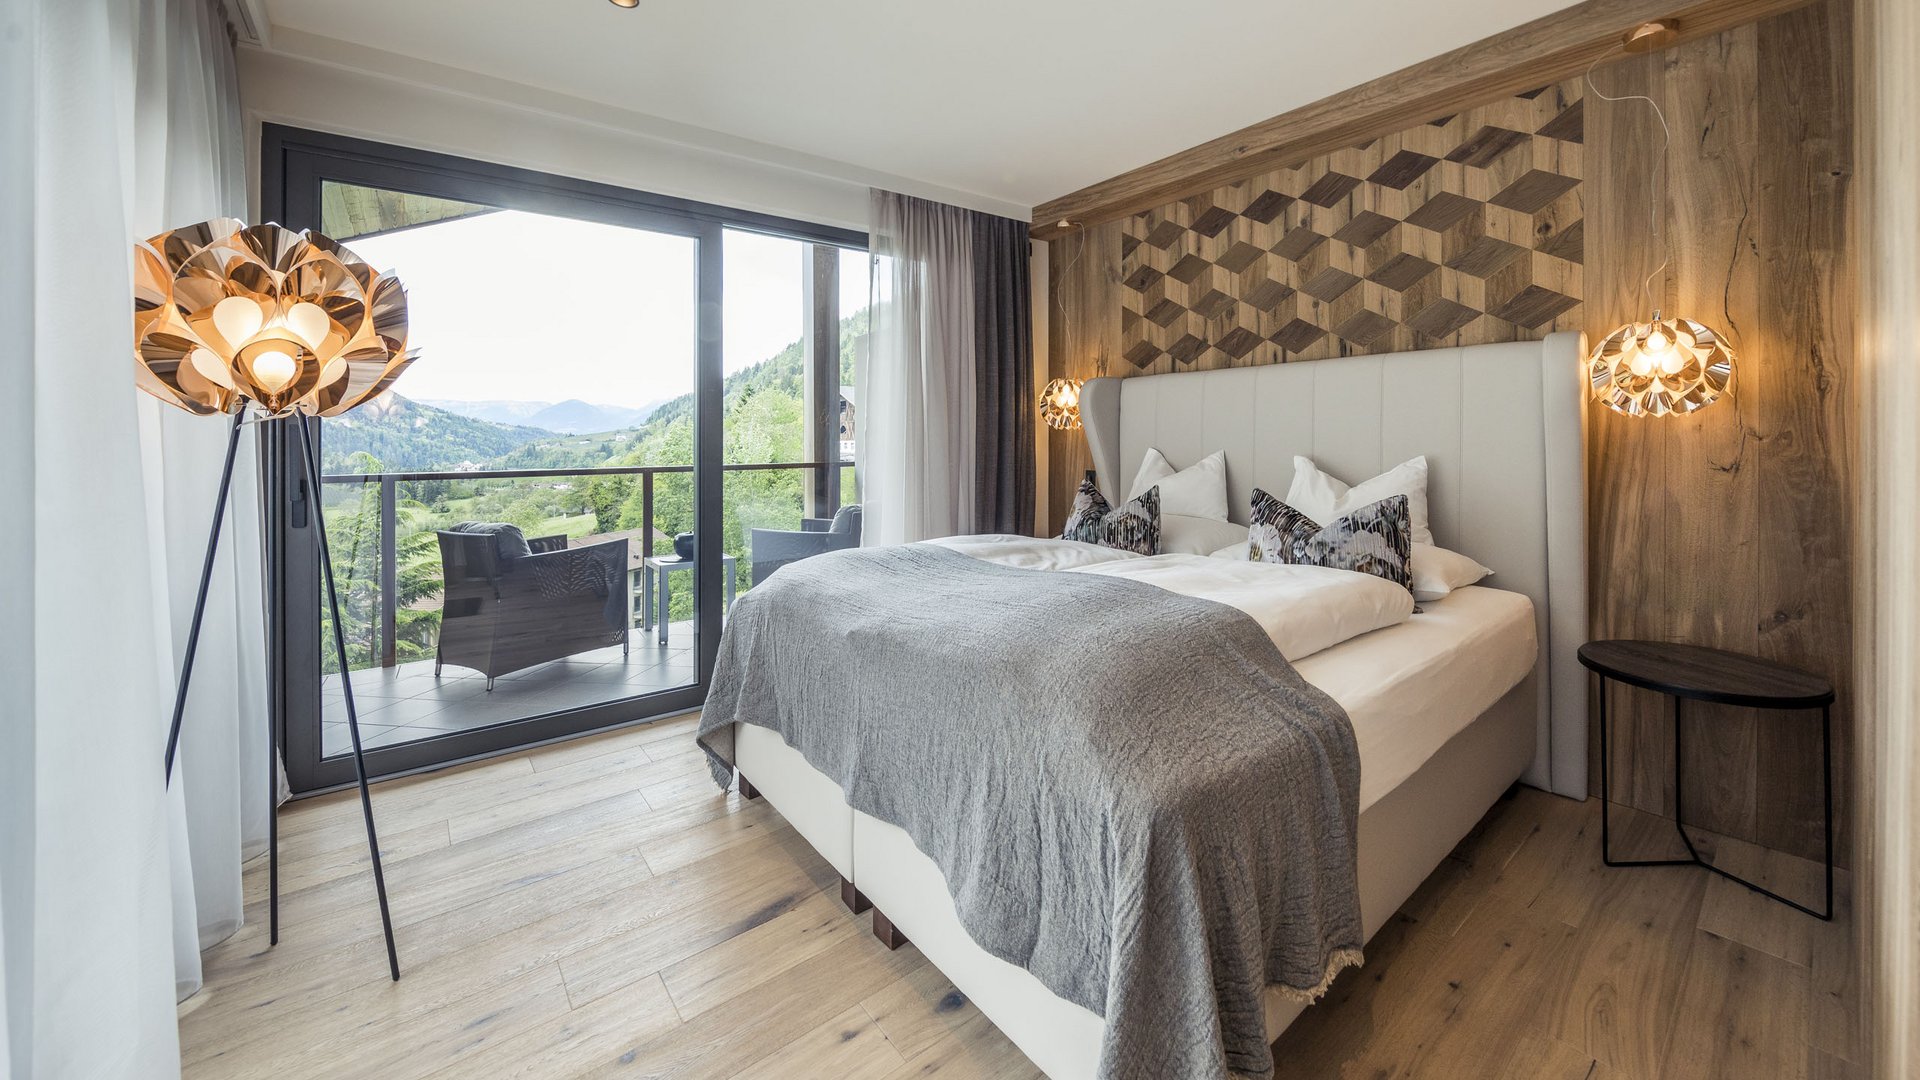 Offers for your luxury chalet in South Tyrol